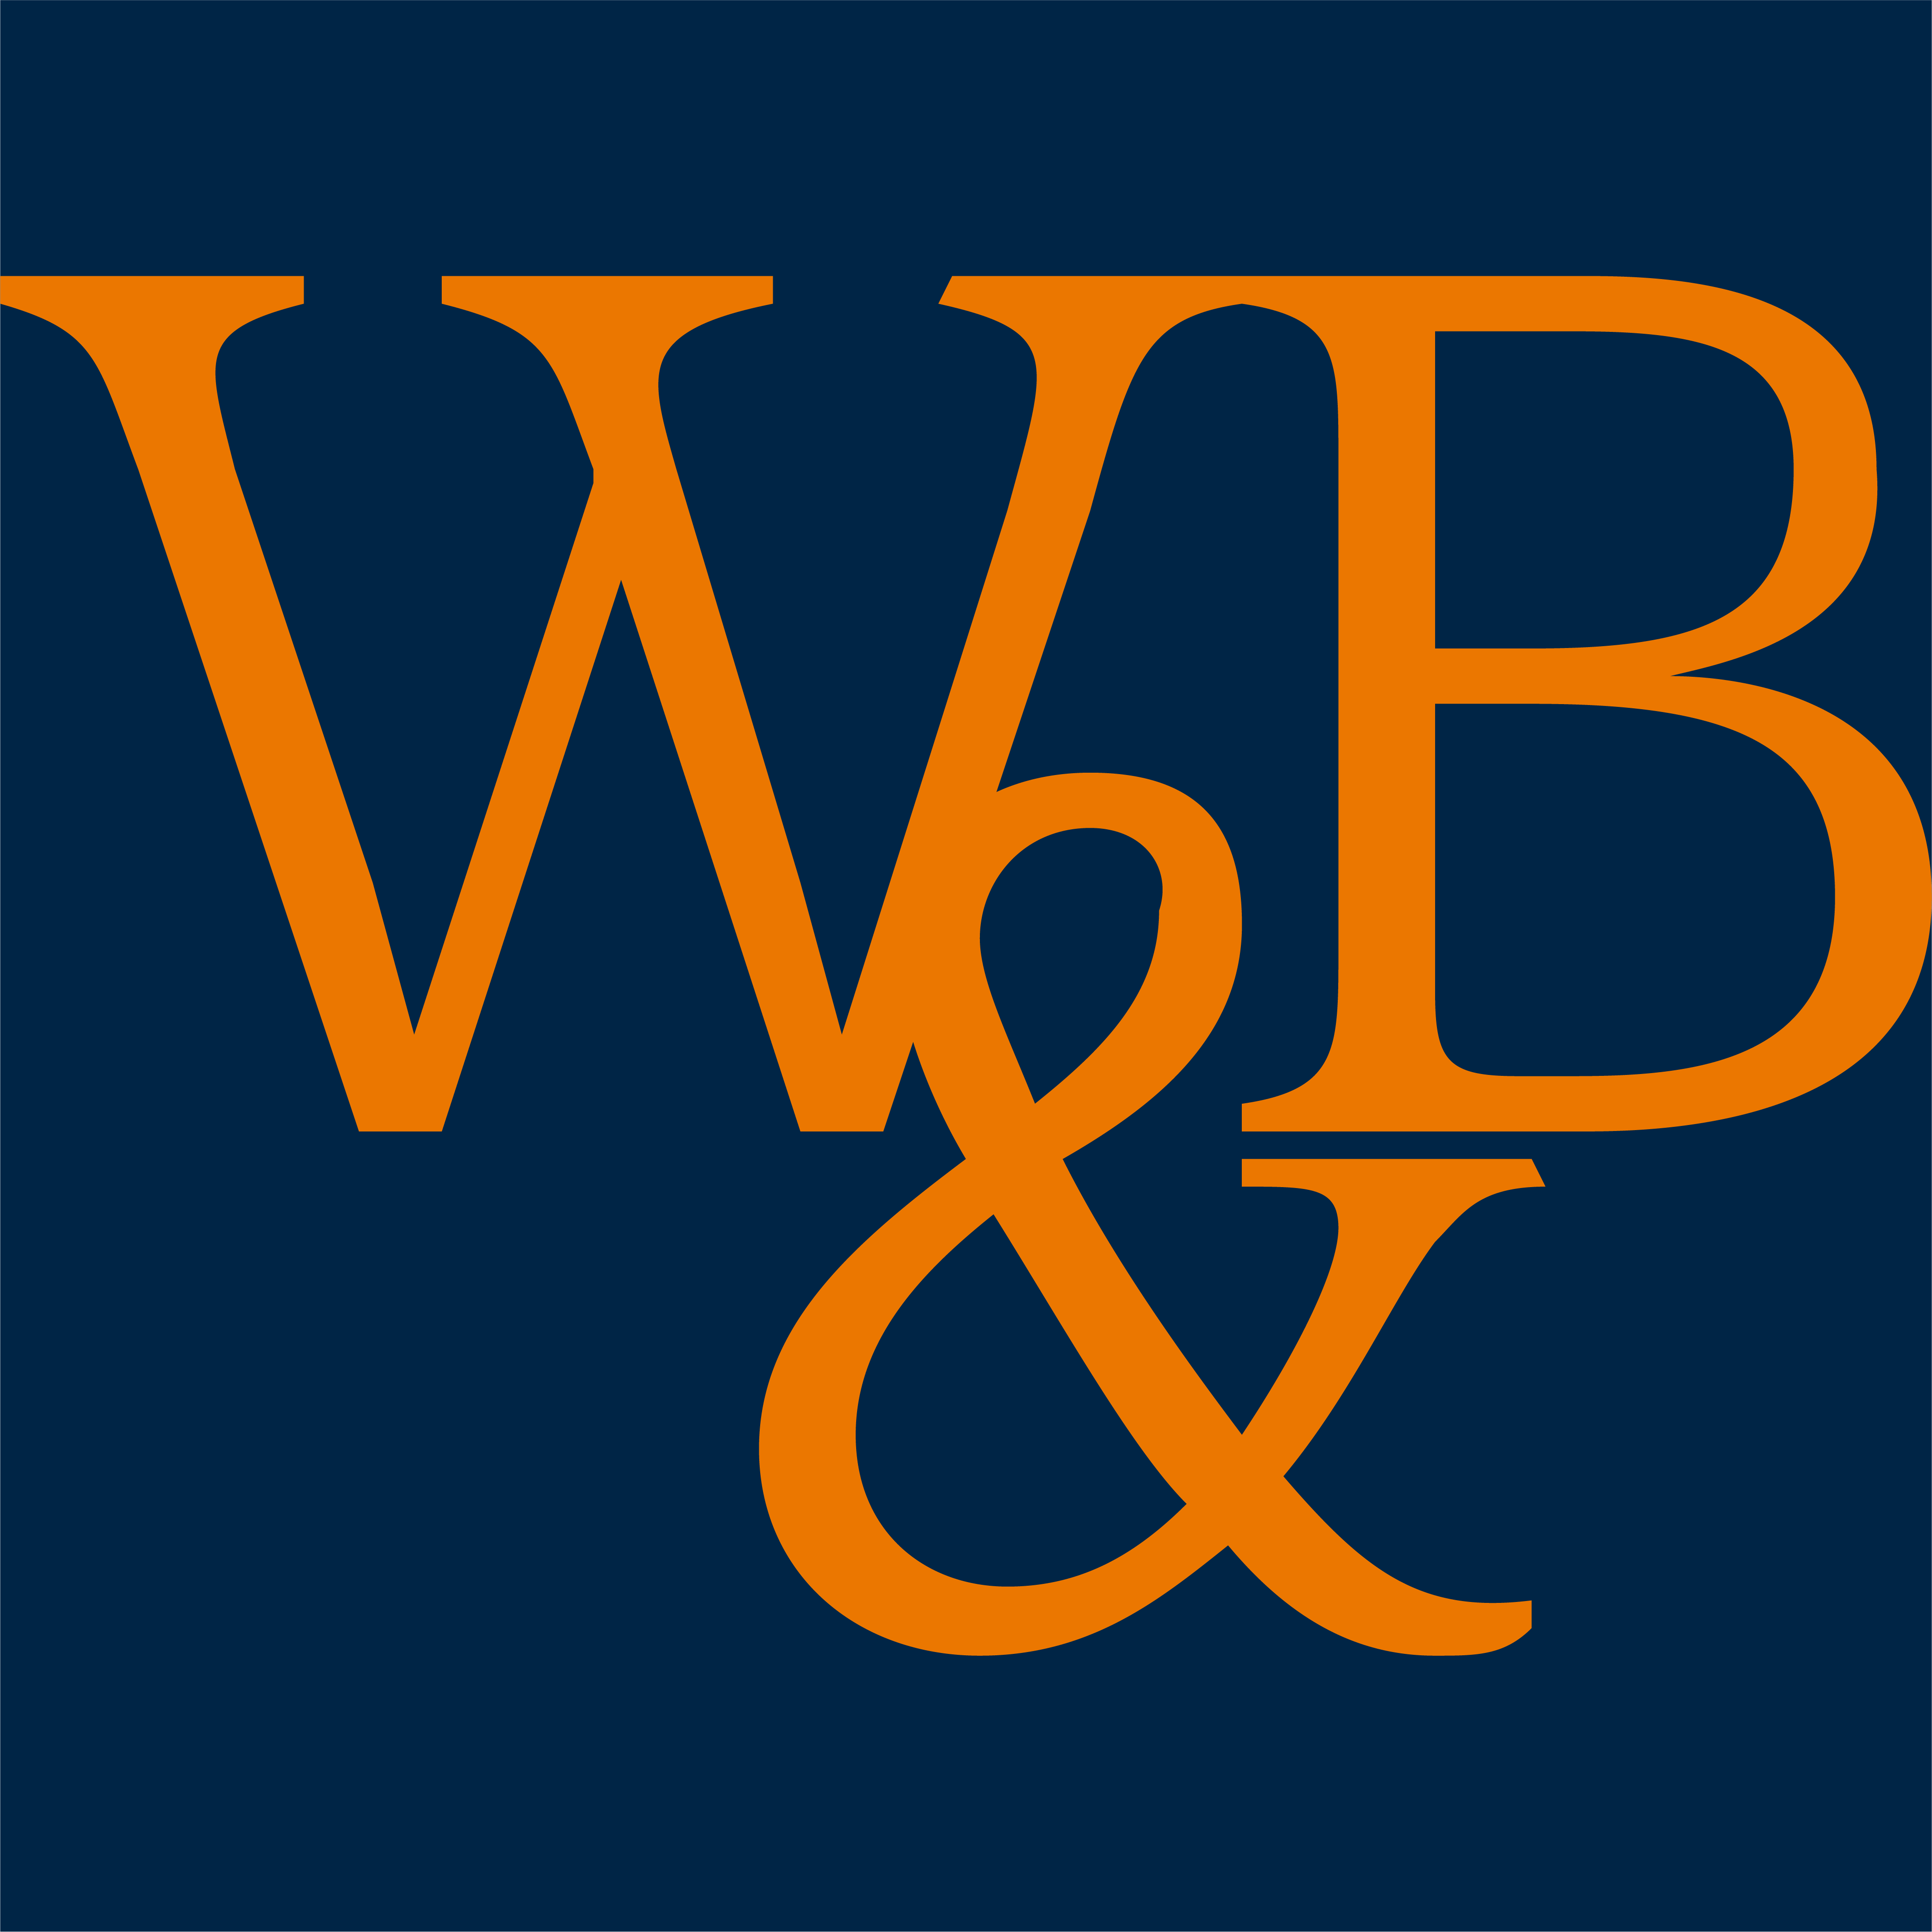 Williams & Bell Funeral Directors logo J. W. Bell Funeral Directors Wirral 01516 775057